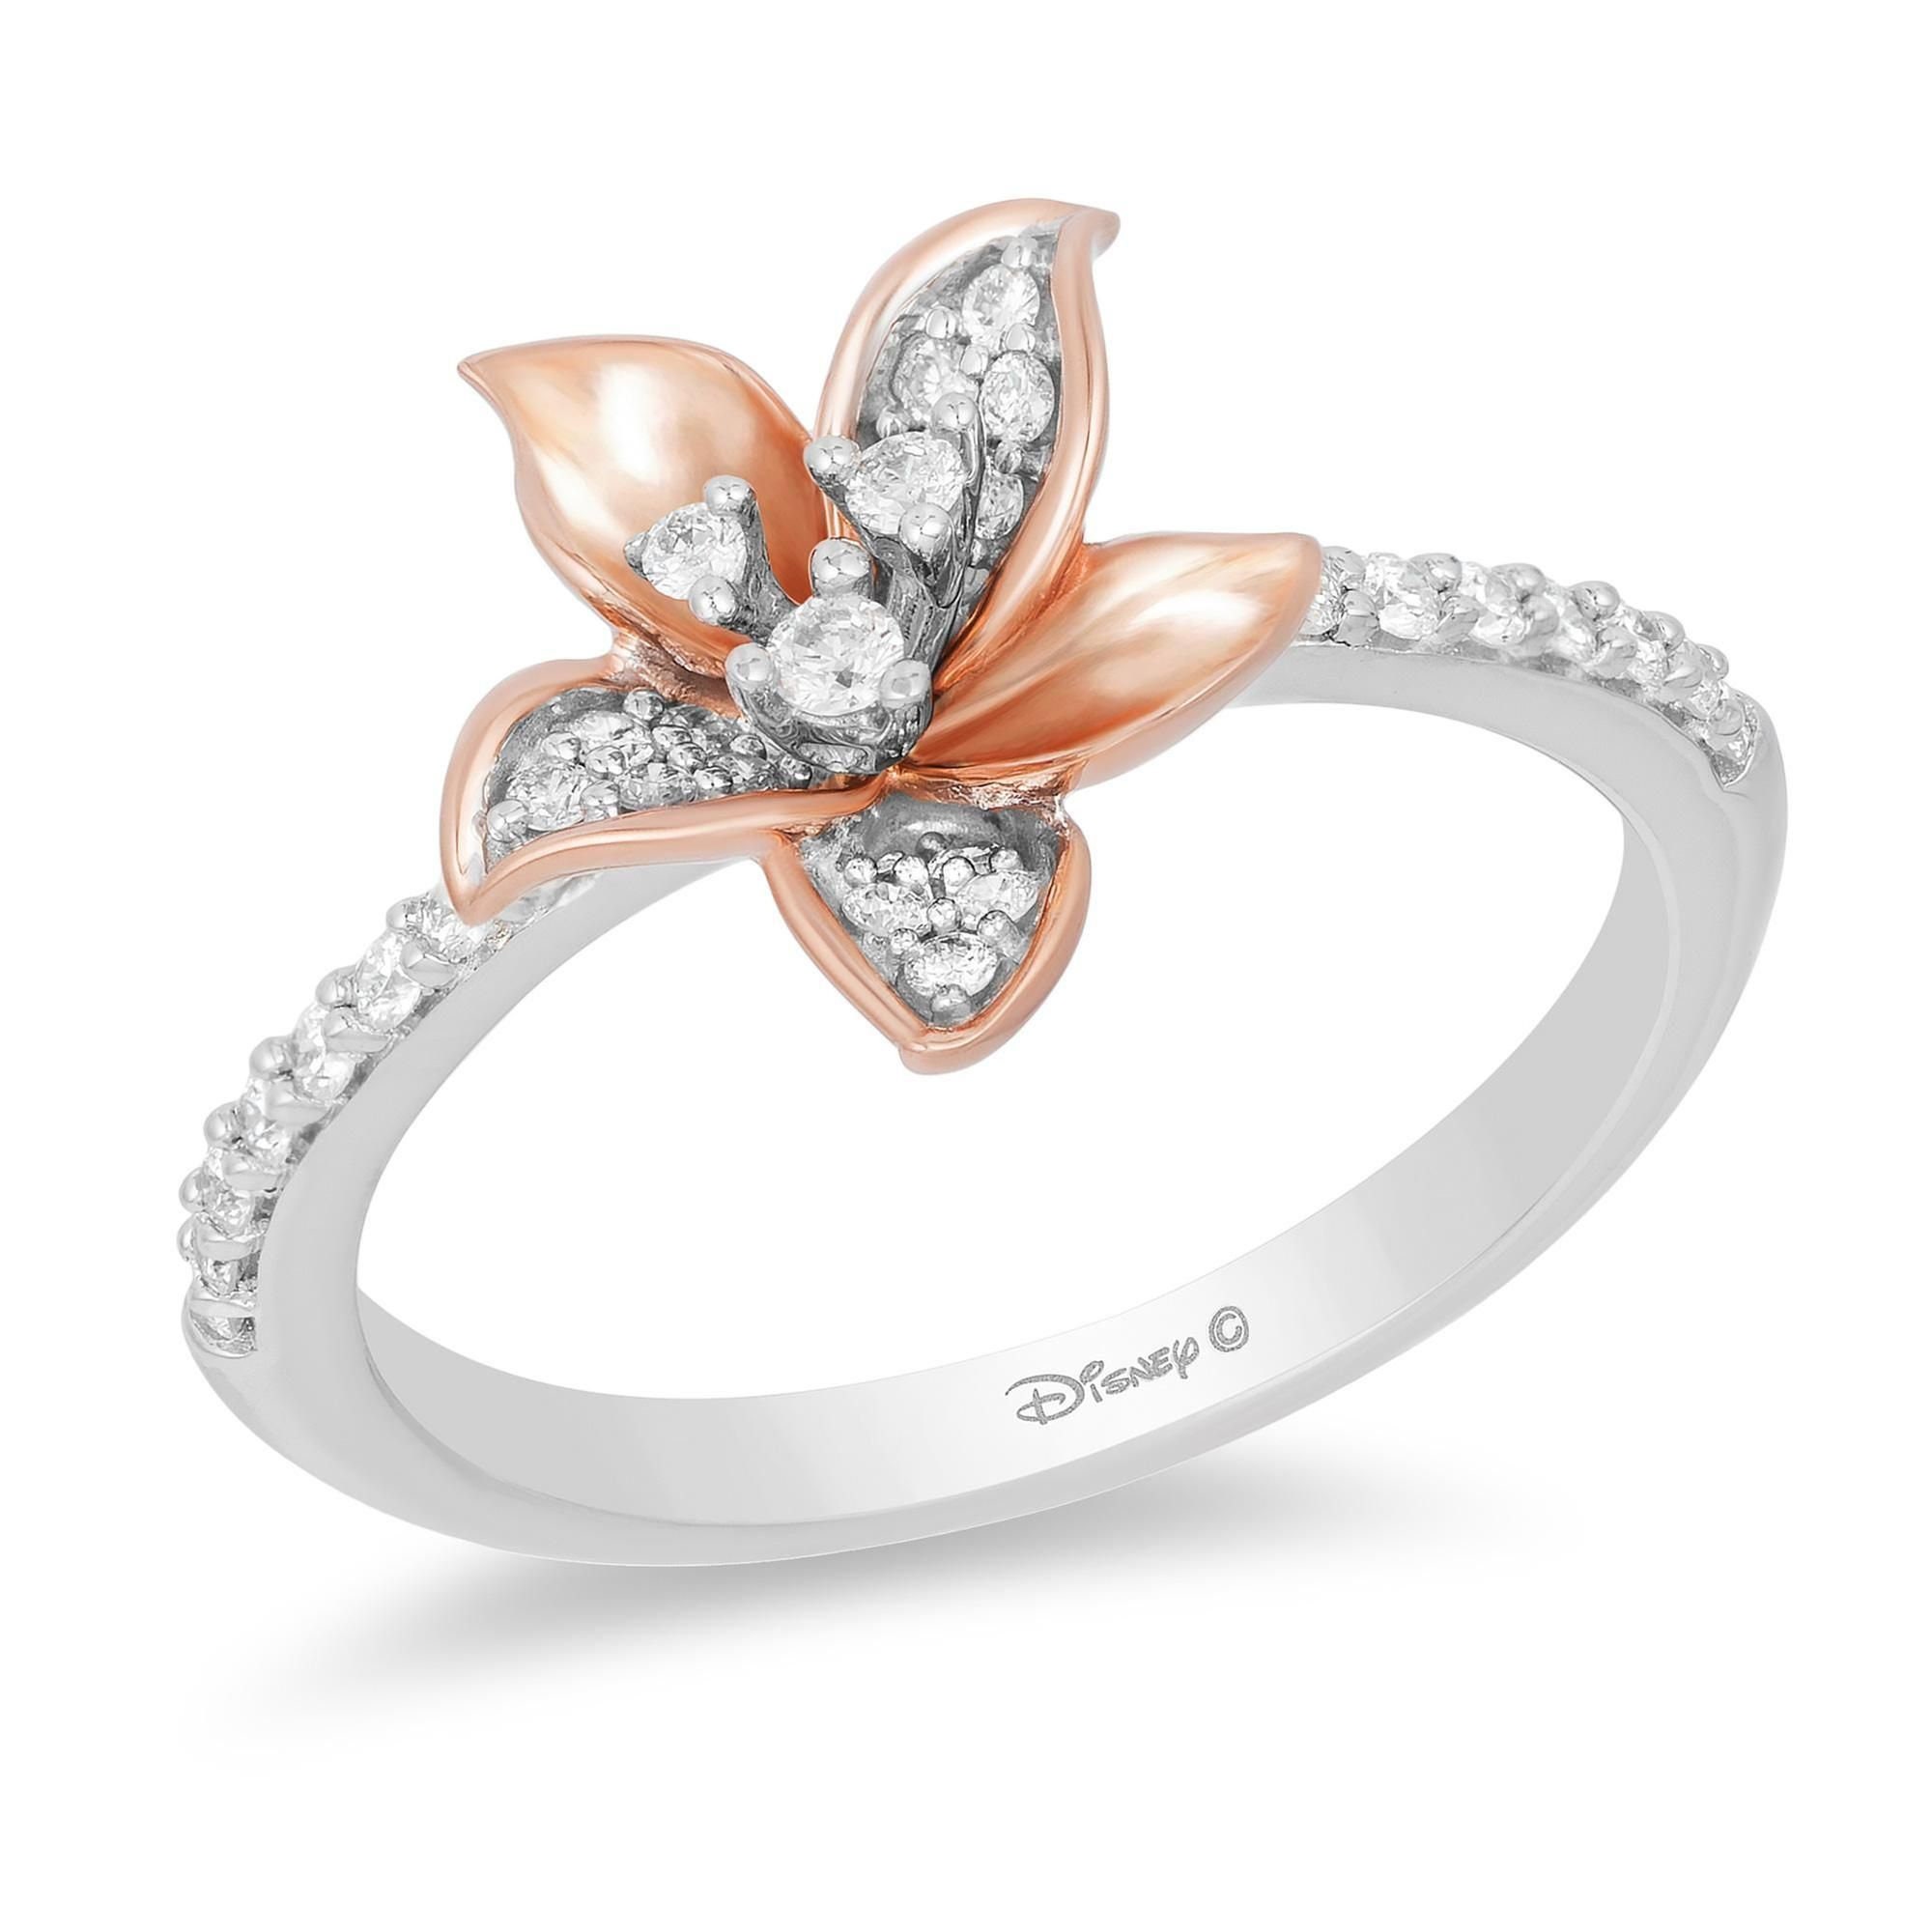 Disney Rapunzel Inspired Diamond Magical Flower Ring in 10K Sterling Silver & Rose Gold 1/10 Cttw | Enchanted Disney Fine Jewelry 5